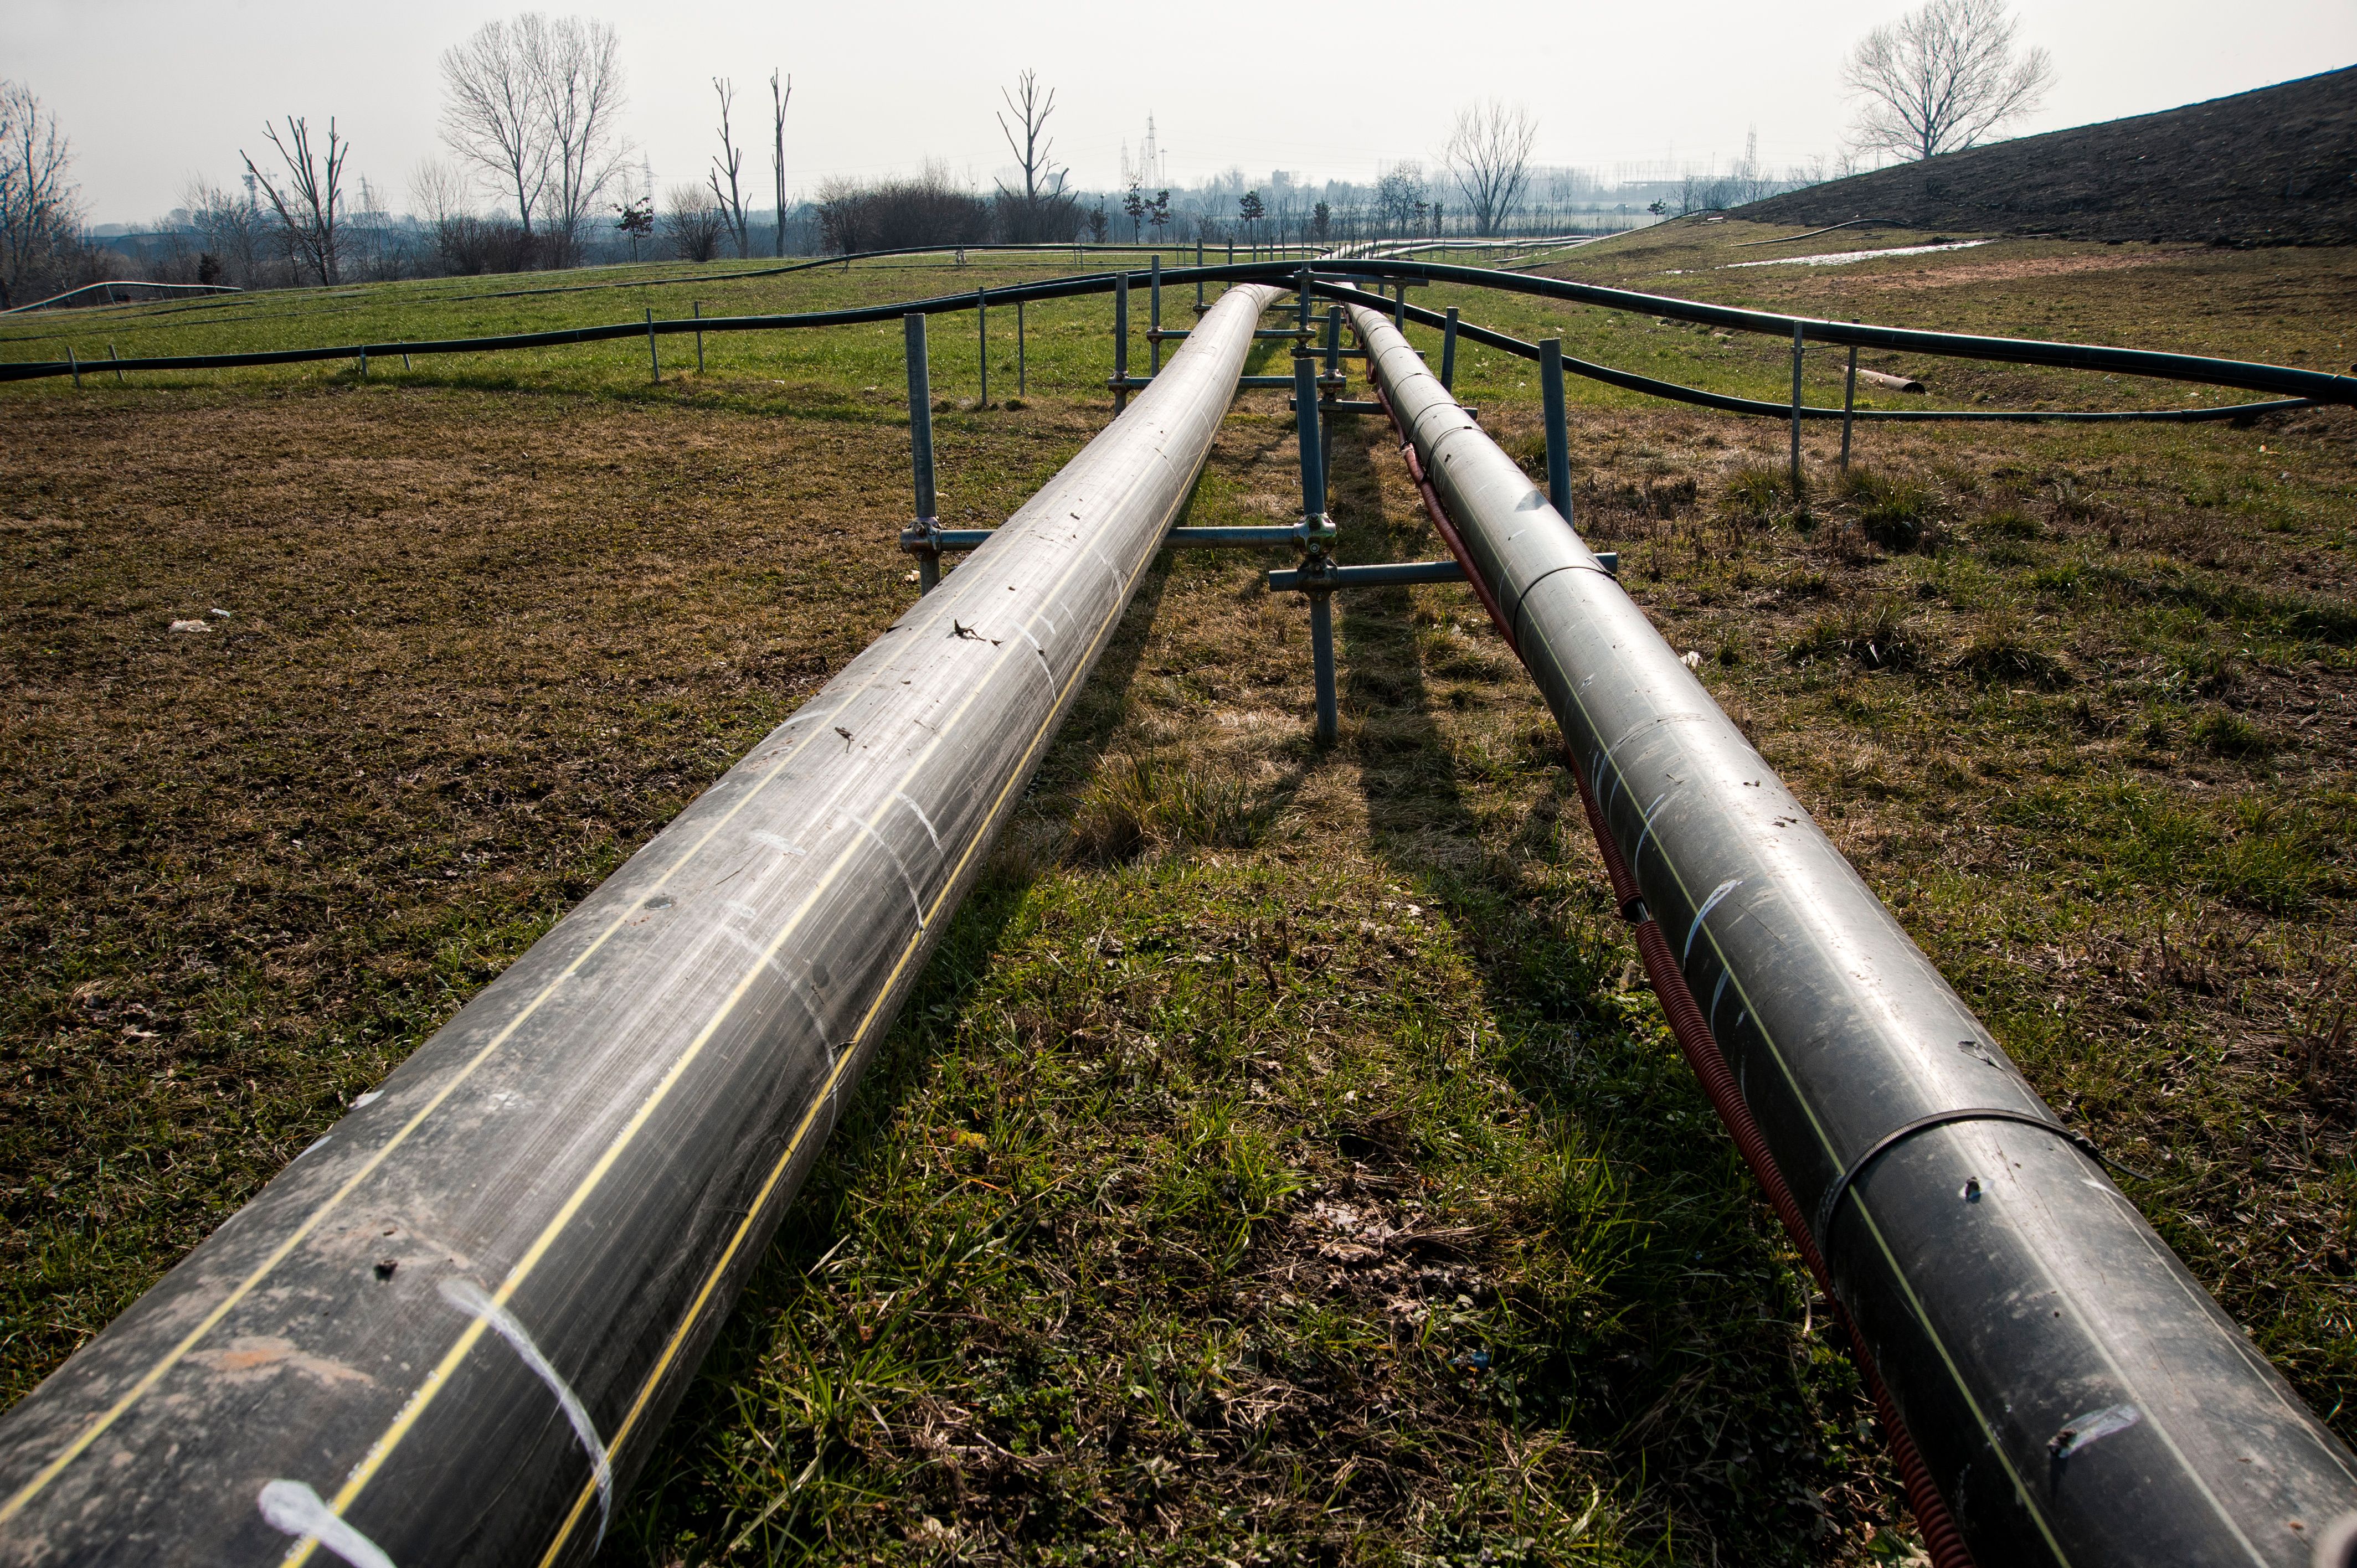 Two natural gas distribution pipelines passing through a field.